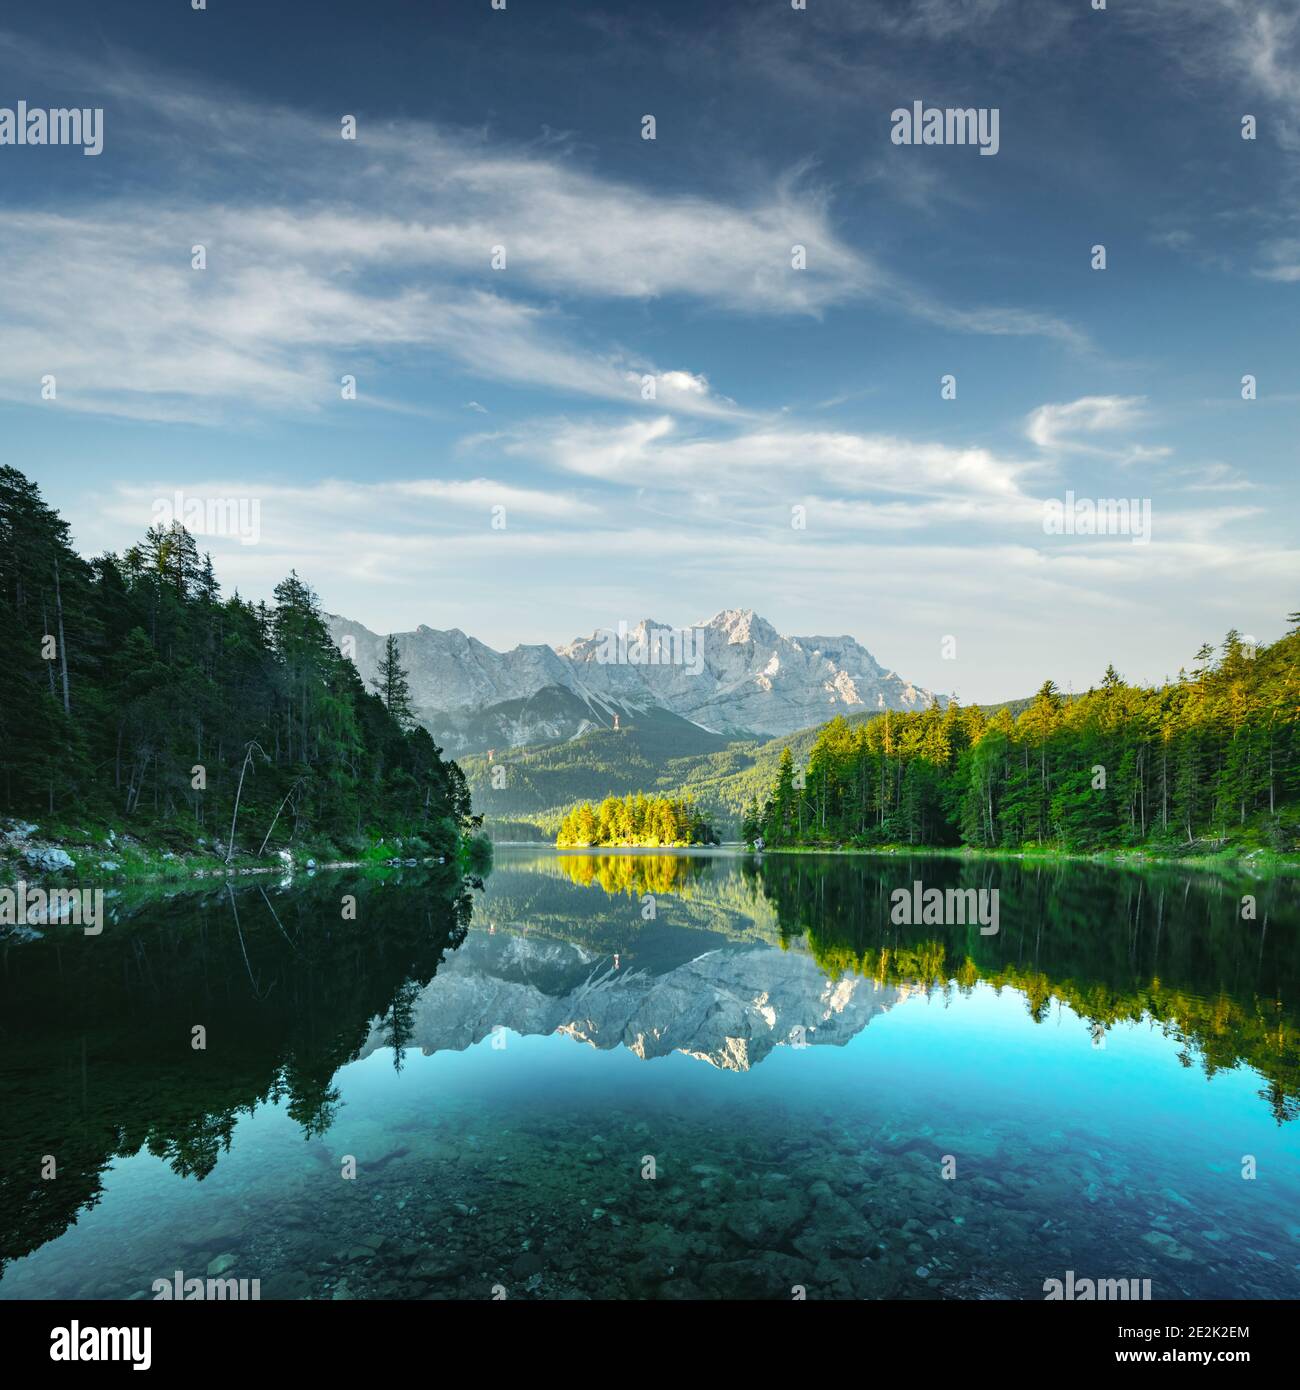 Fantastic view on mountain lake Eibsee, located in the Bavaria, Germany. Dramatic unusual scene. Alps, Europe. Landscape photography Stock Photo